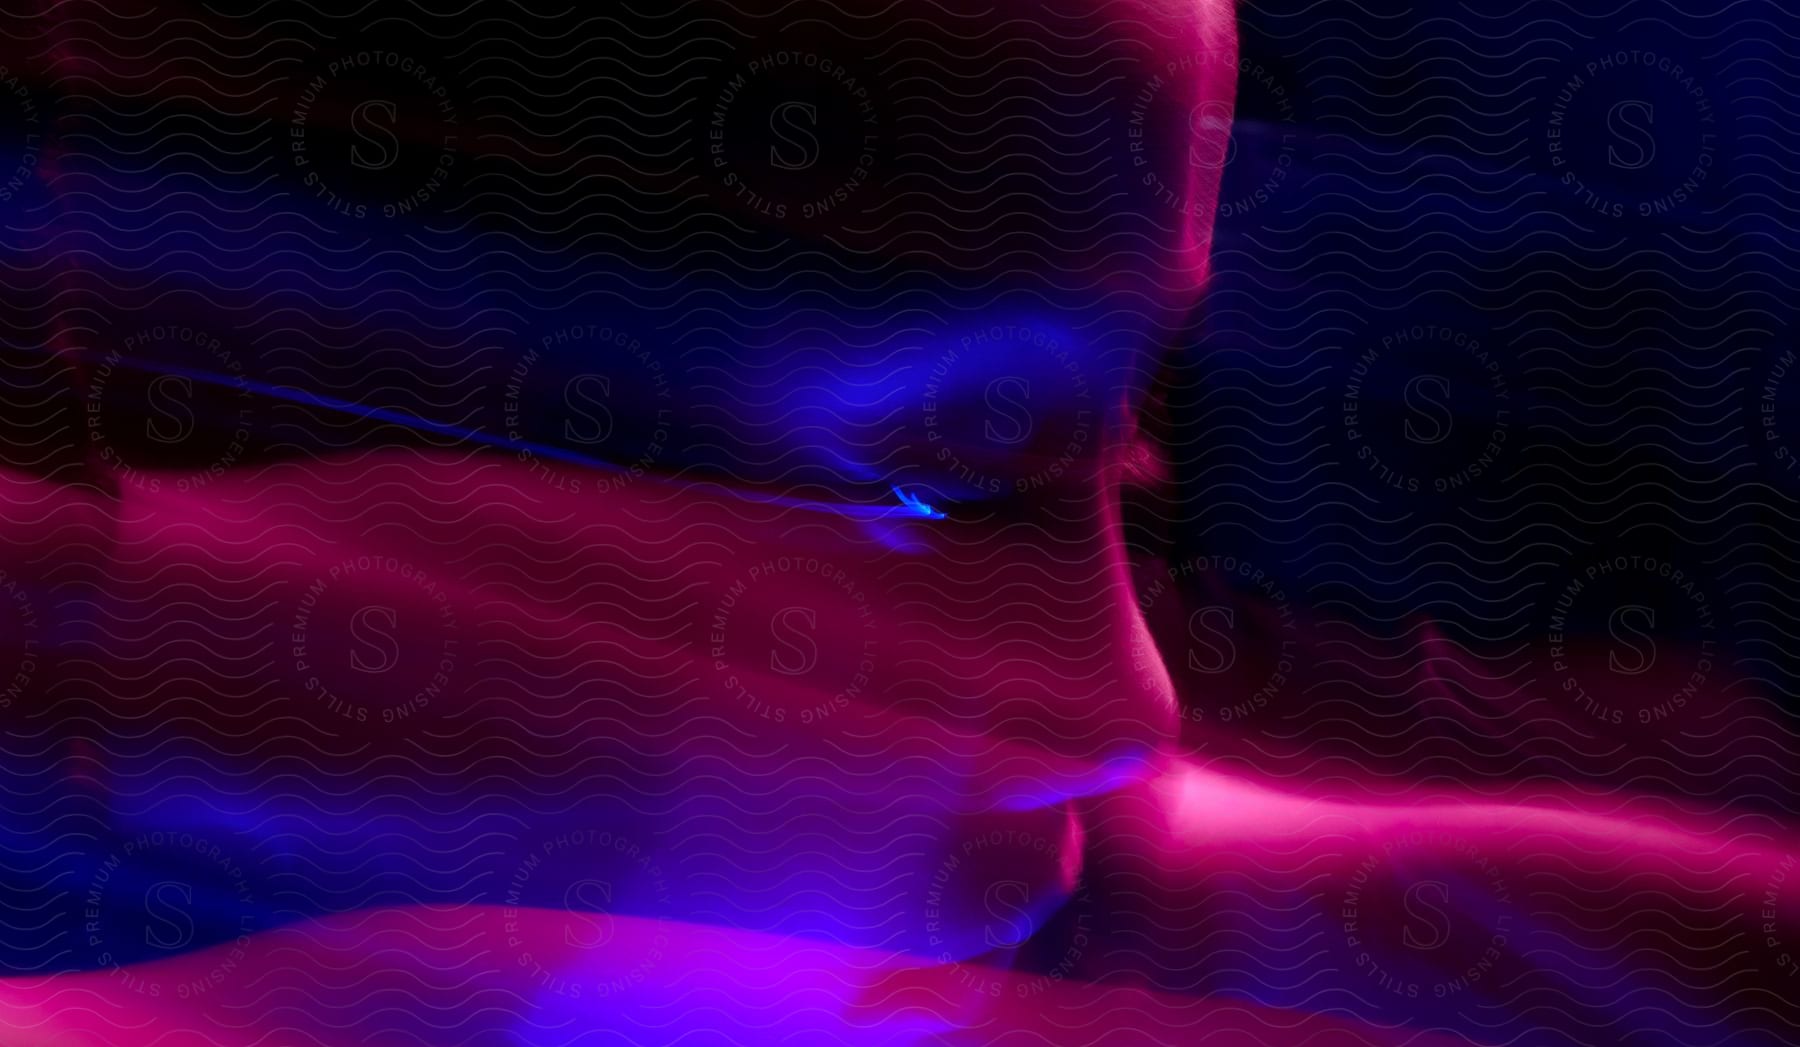 Child under blue and purple lights with motion blur